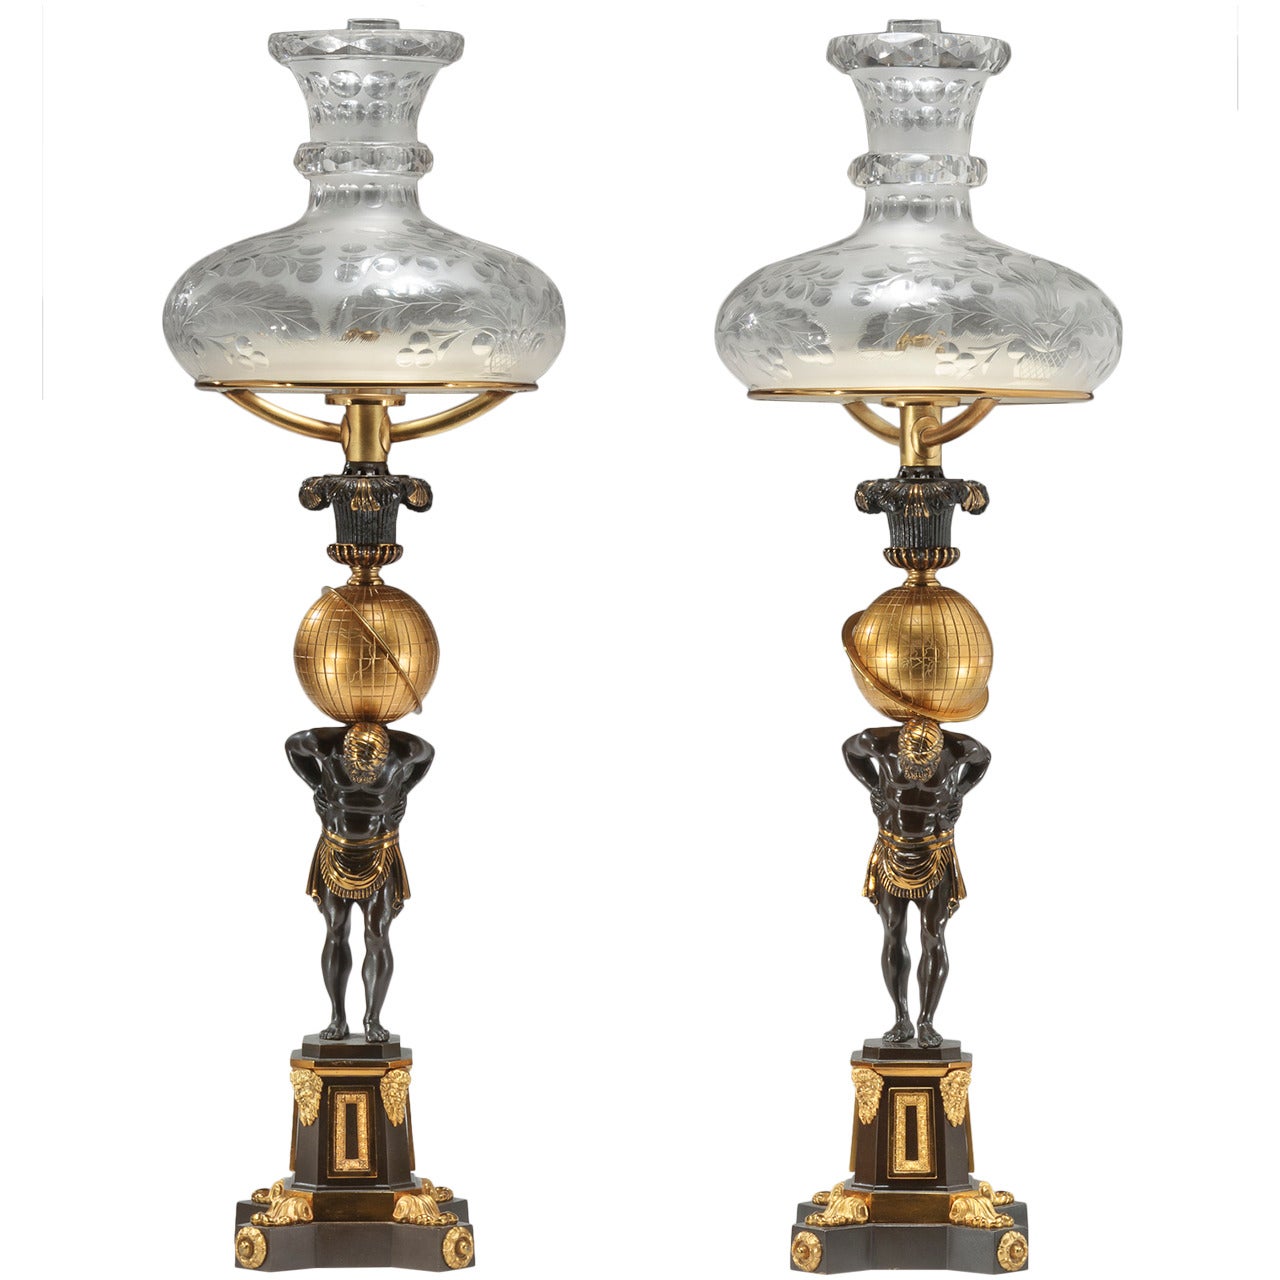 Pair of Lacquered Brass Figural Sinumbra Argand Lamps, circa 1835